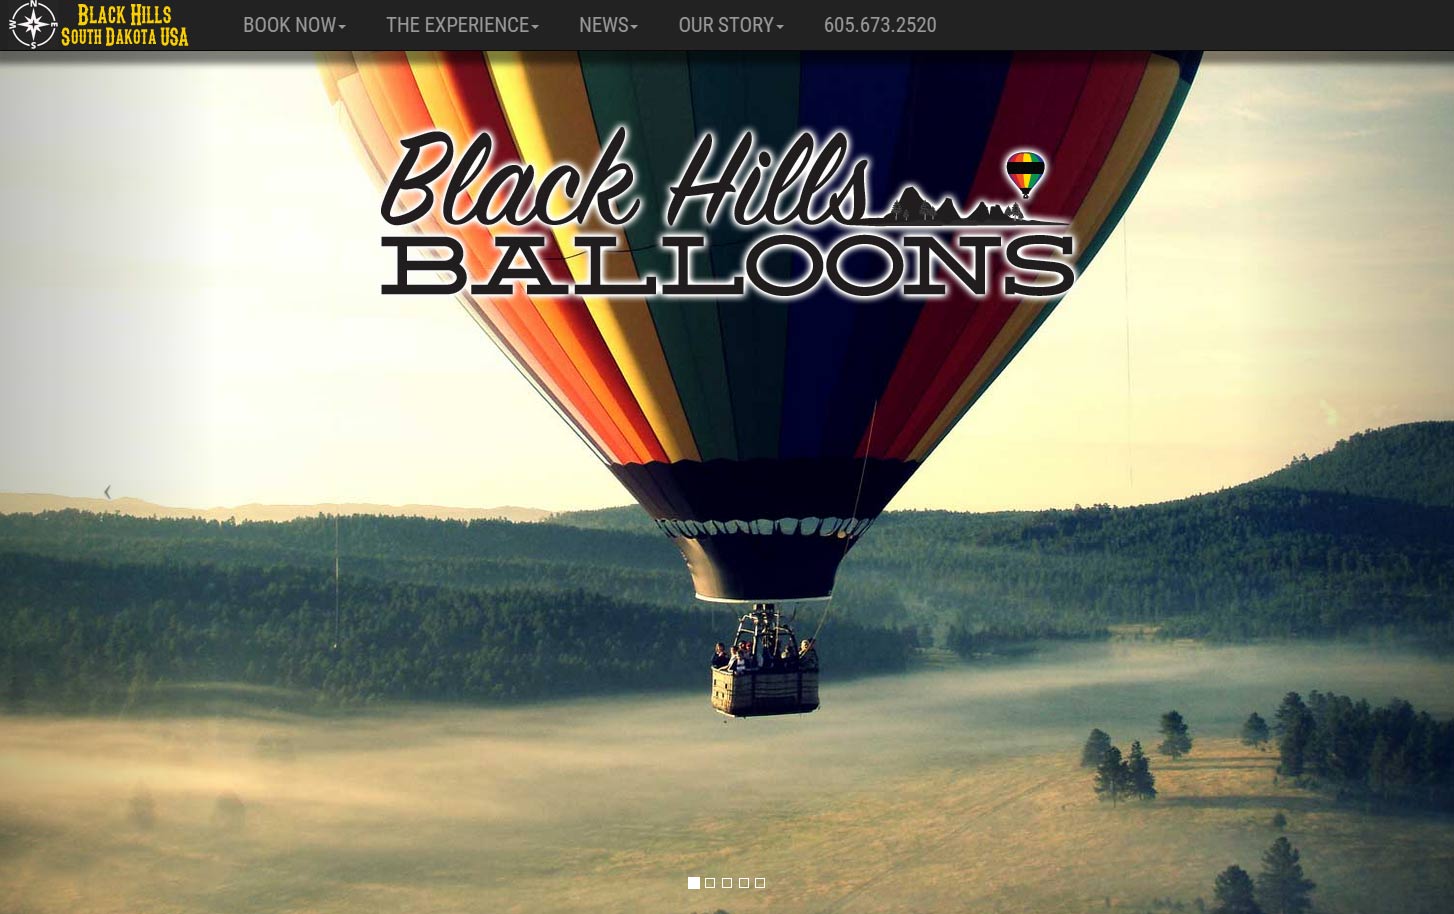 graphical interface, Computer Repair Orlando, custom reservation system, booking, hot air balloon rides, web development